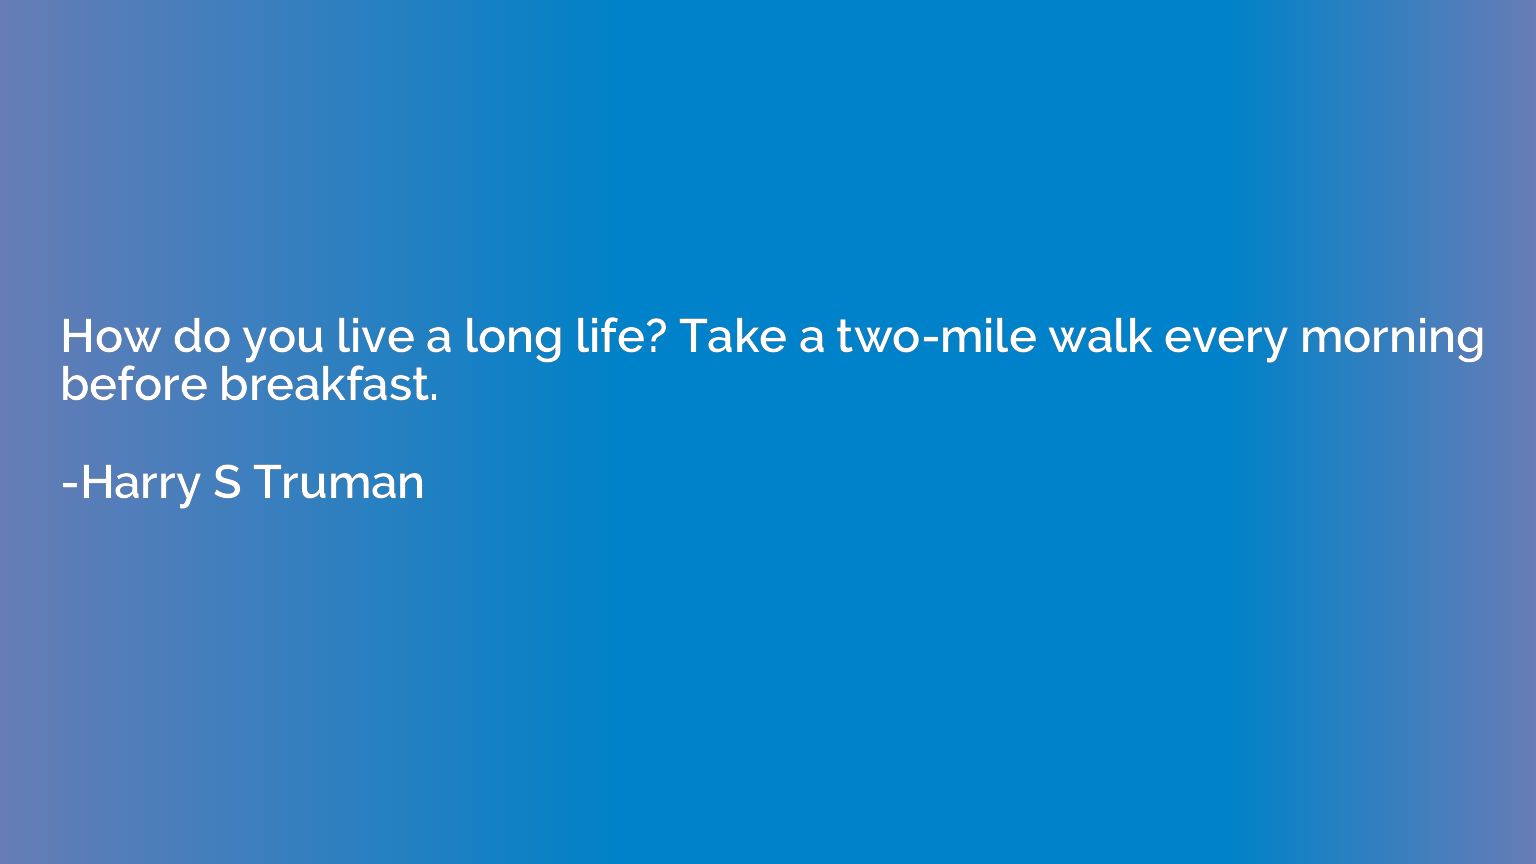 How do you live a long life? Take a two-mile walk every morn